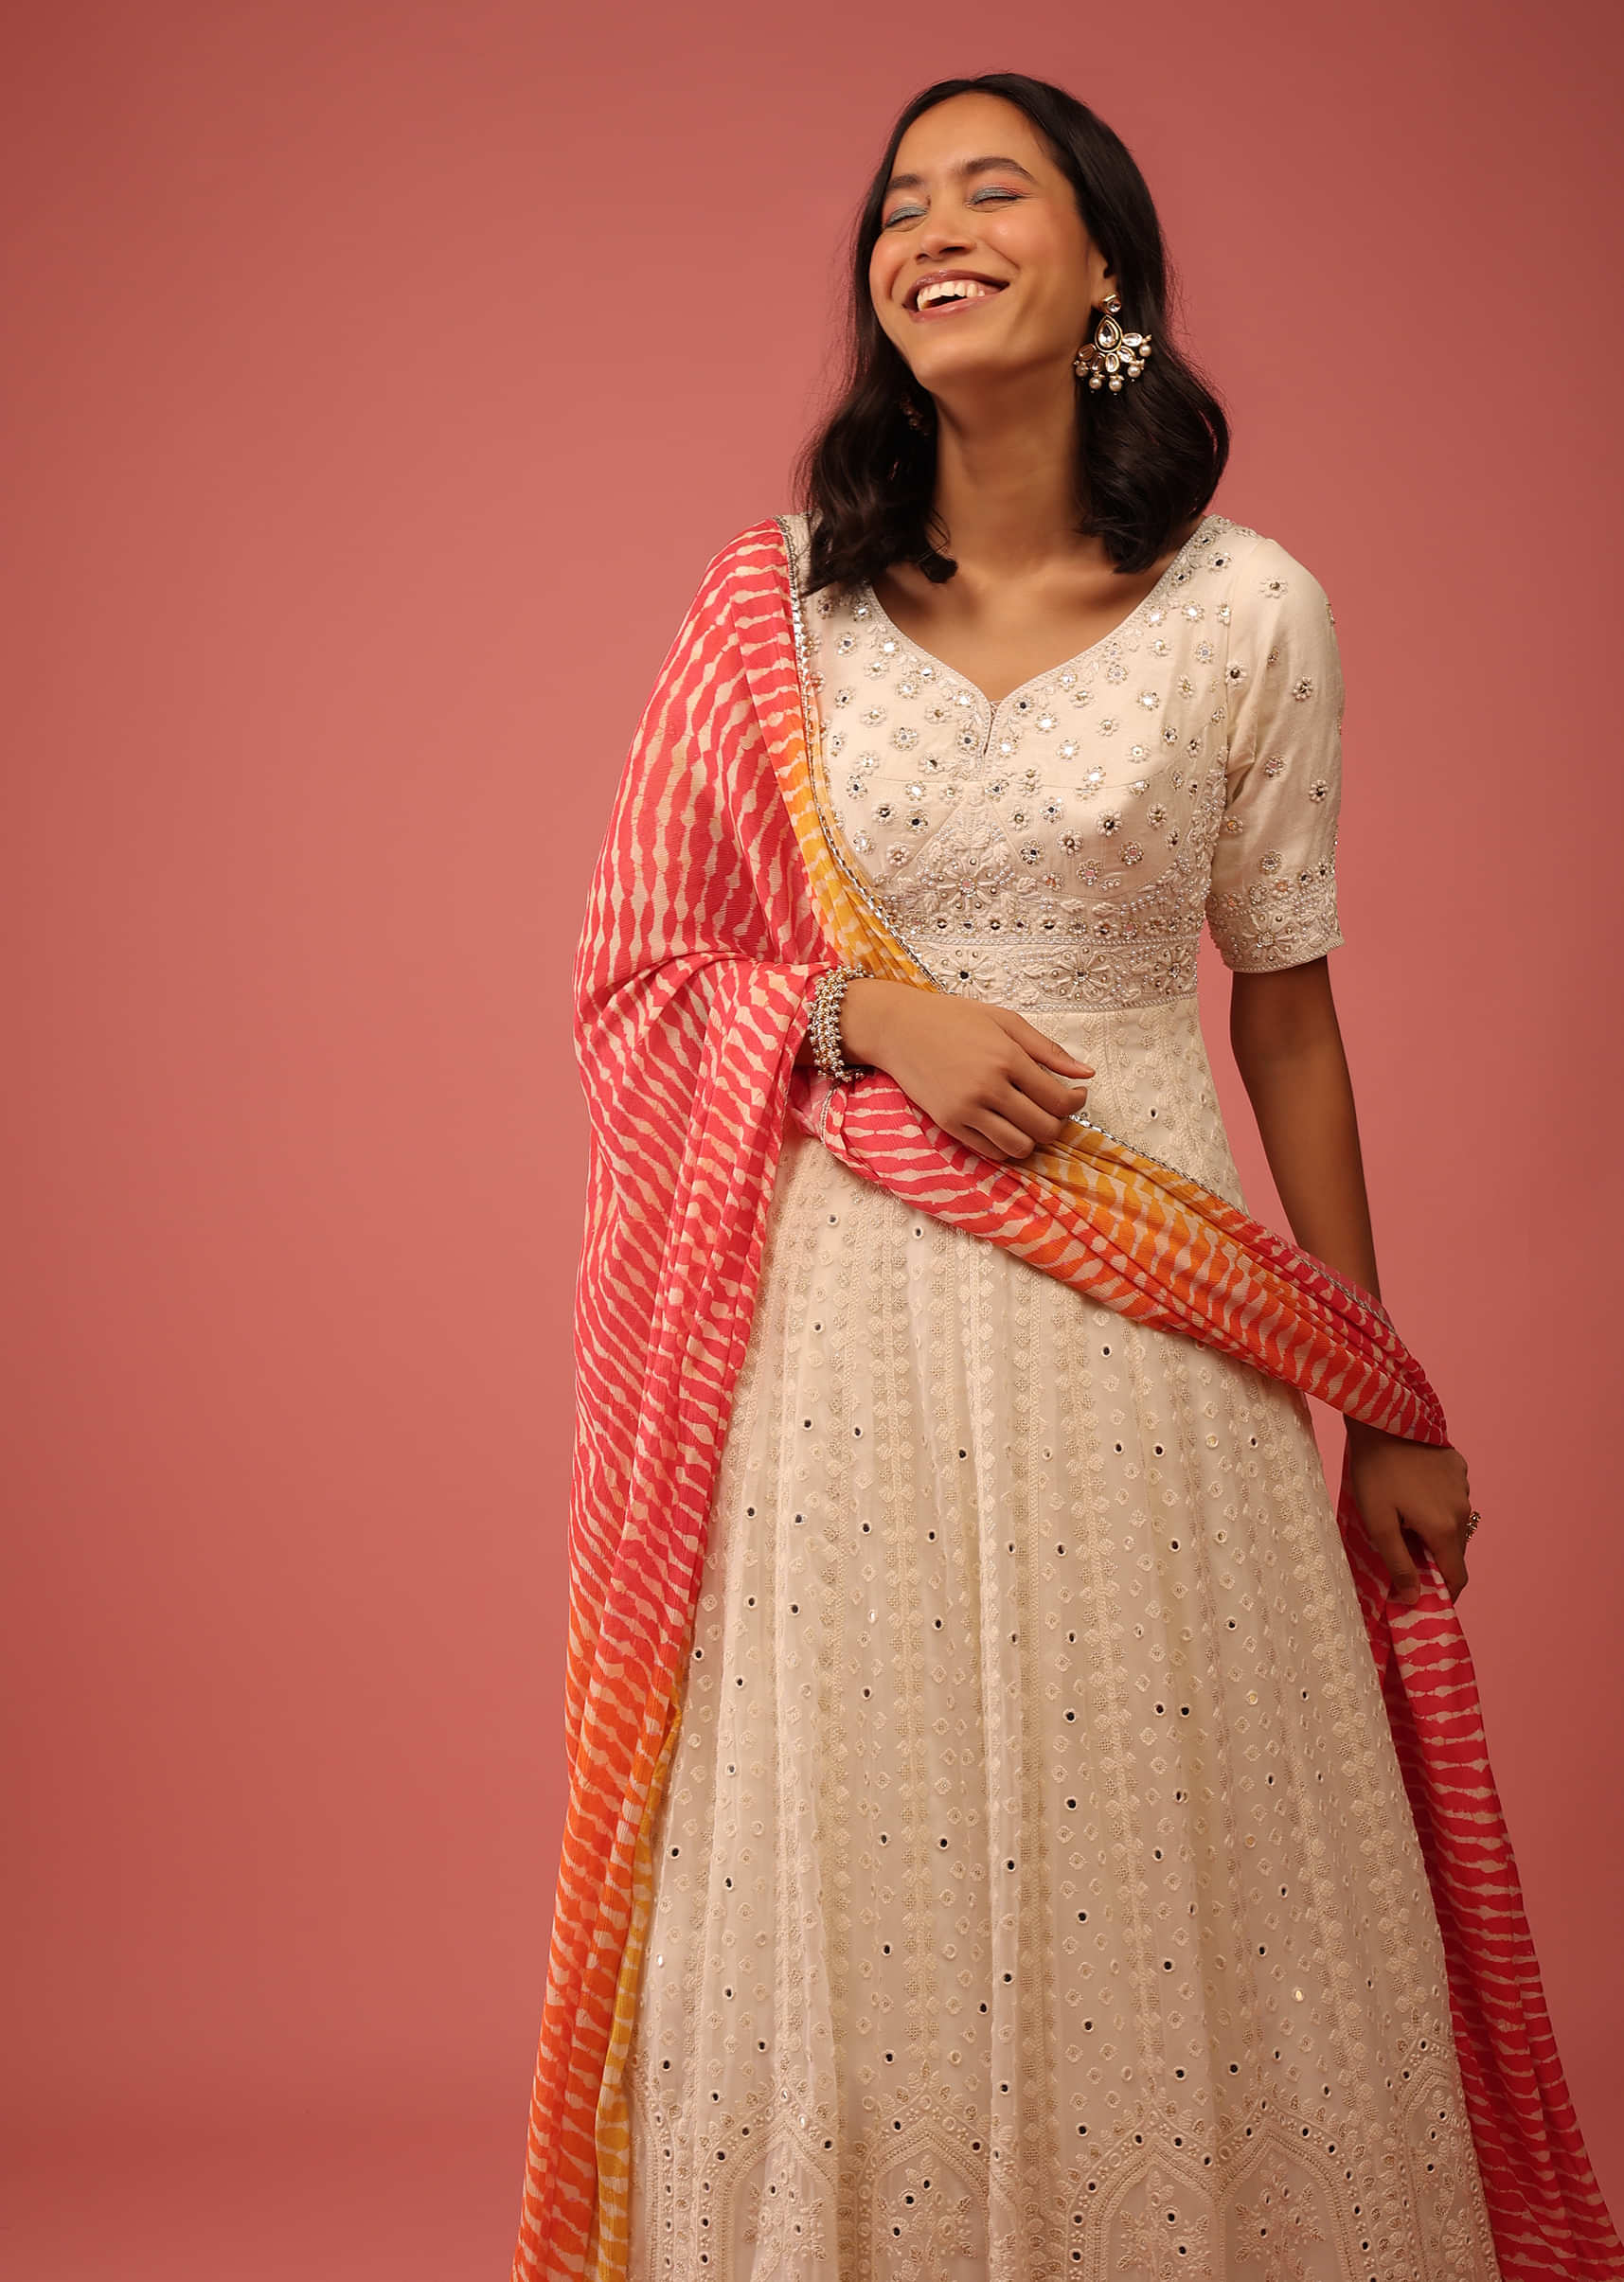 Daisy White Anarkali Suit In Georgette With Lucknowi Thread Embroidery And Contrasting Lehariya Dupatta